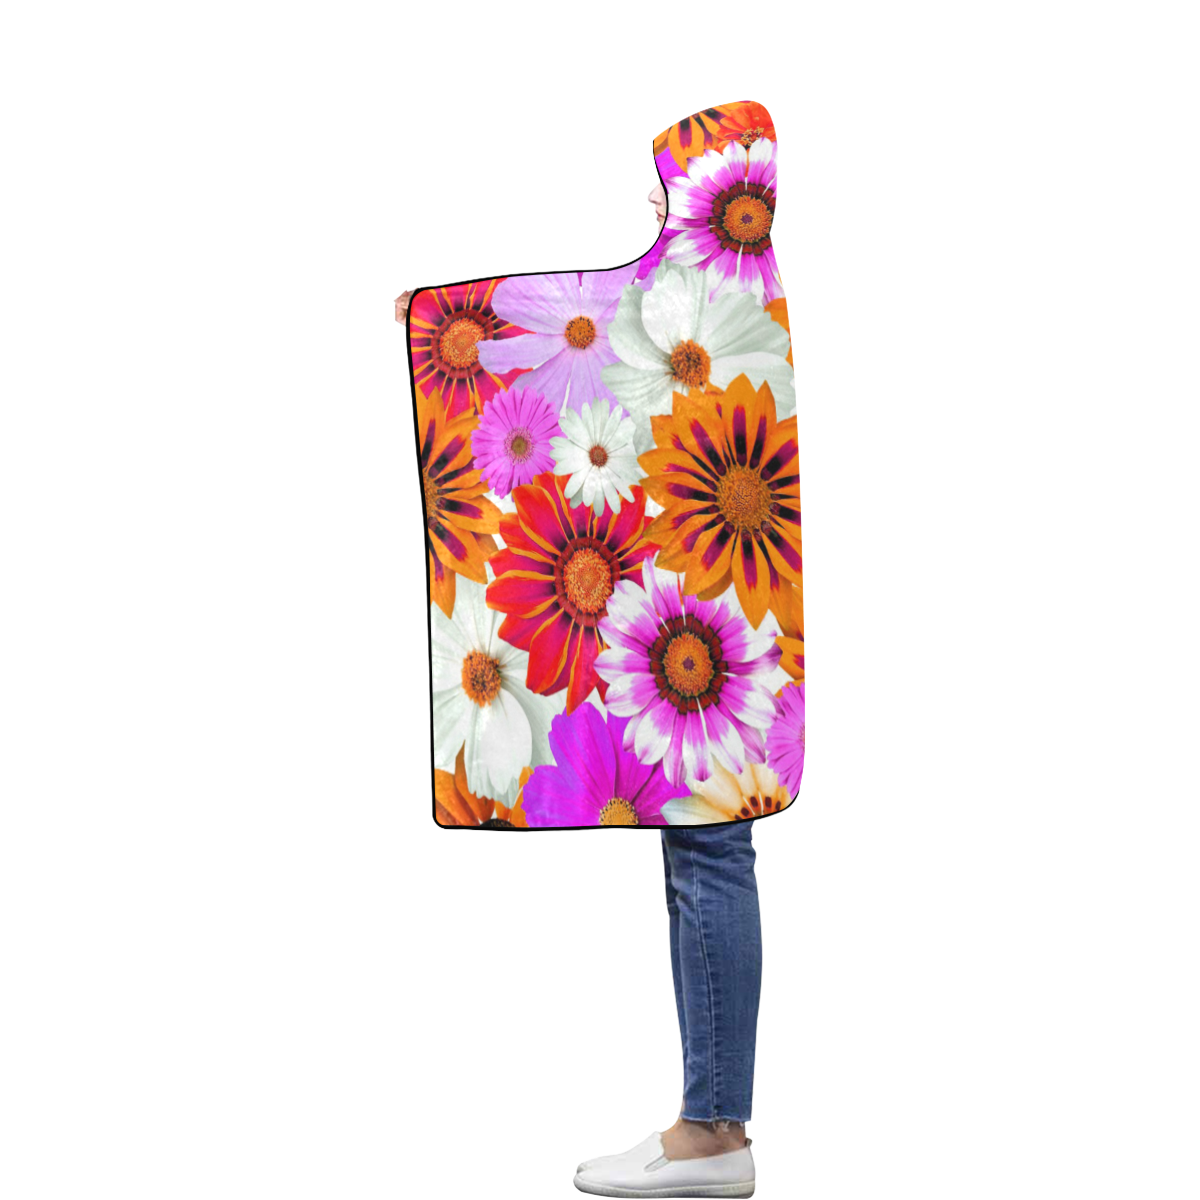 Spring Time Flowers 2 Flannel Hooded Blanket 40''x50''